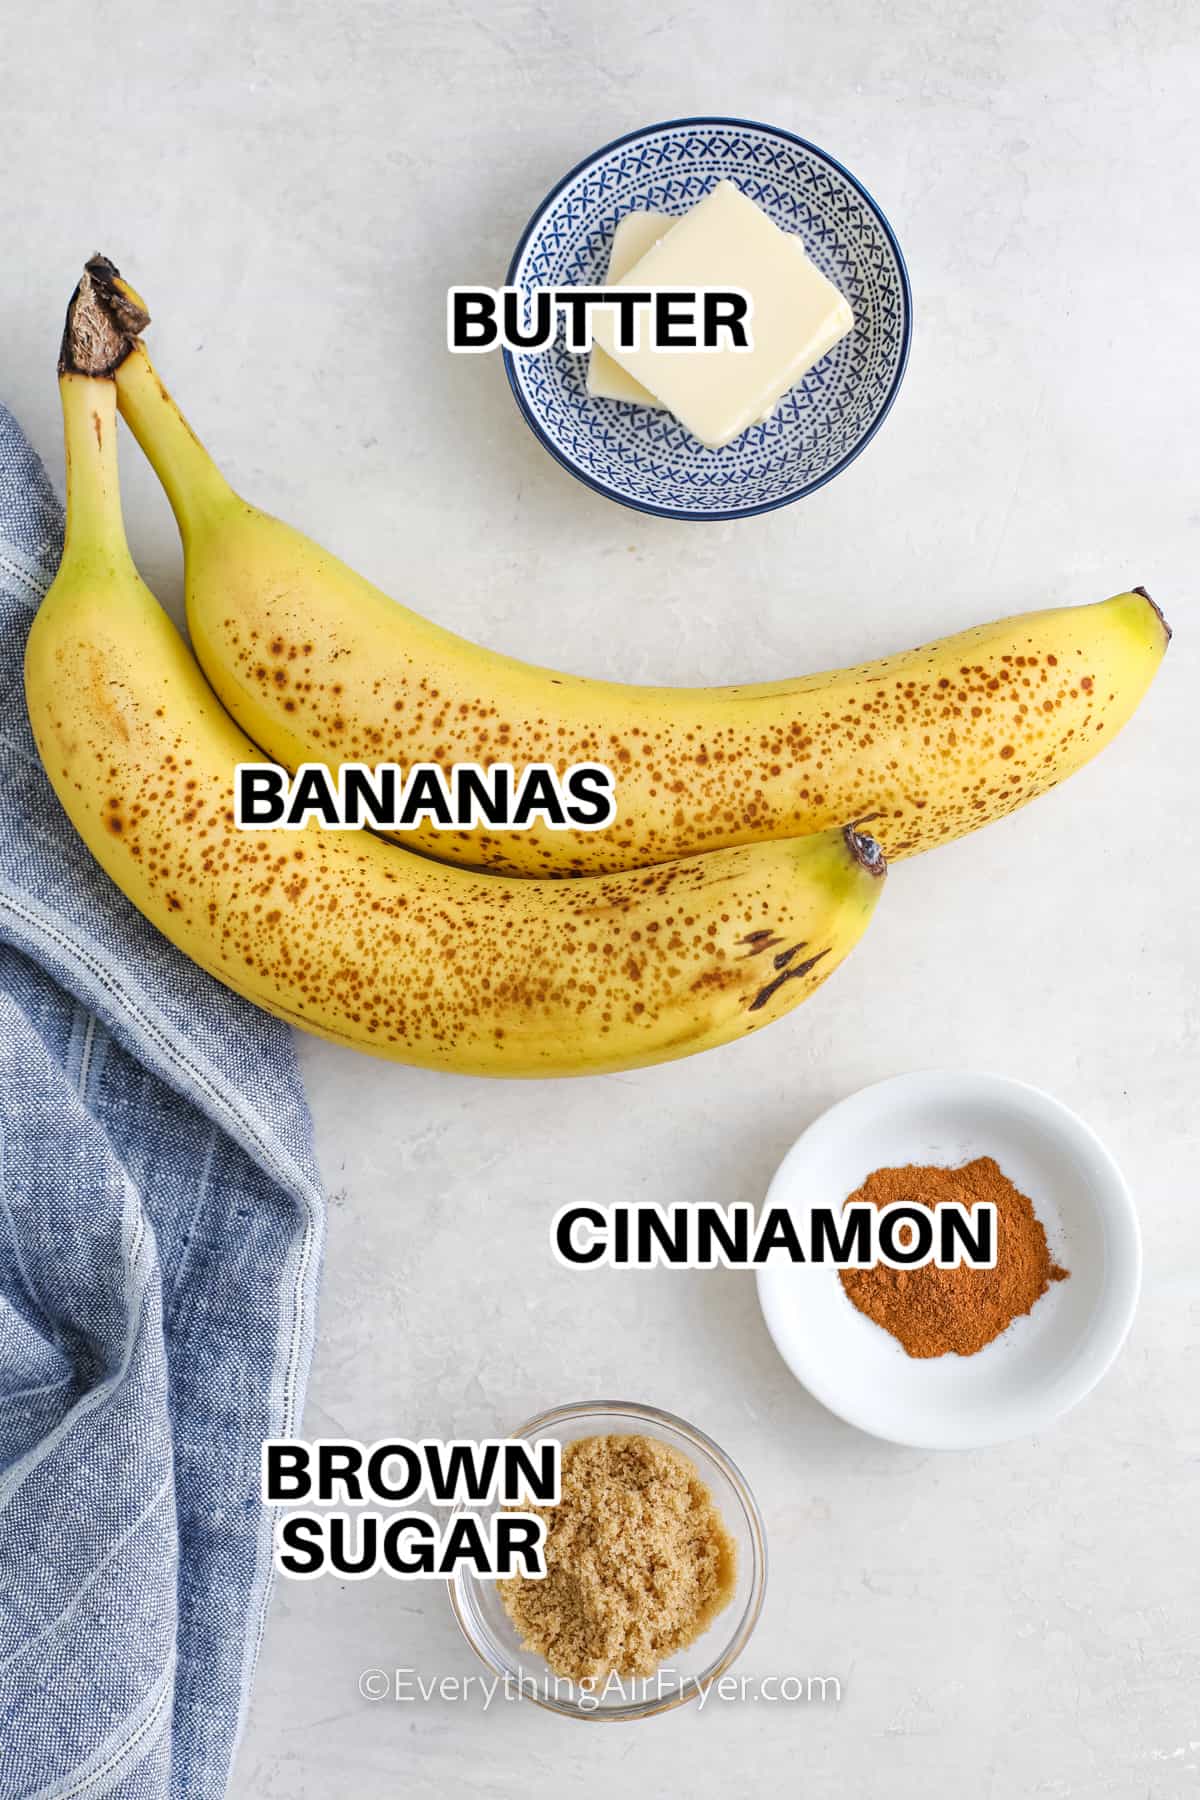 ingredients assembled to make air fryer bananas, including bananas, butter, cinnamon, brown sugar, and butter